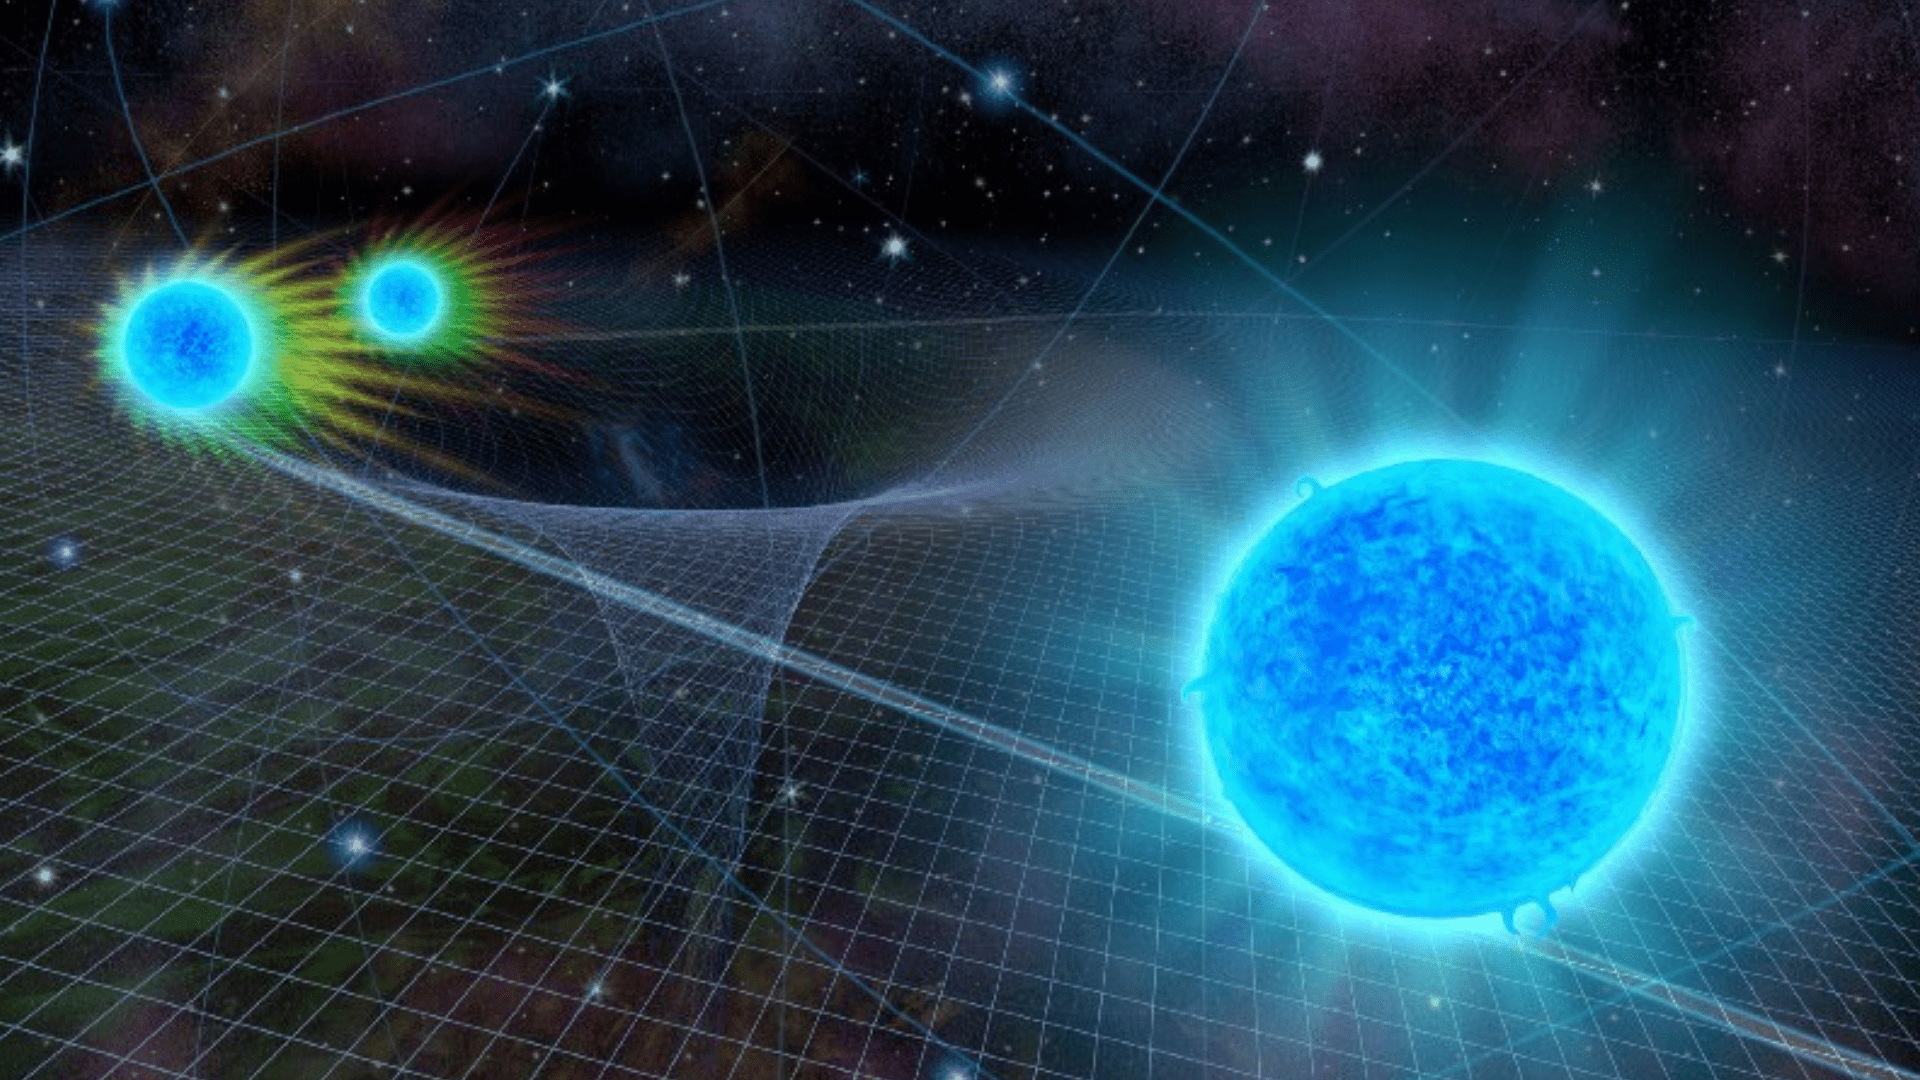 An artist visualization of the star S0–2 as it passes by the supermassive black hole at the Galactic centre. As the star gets closer to the supermassive black hole, light it emits experiences a gravitational redshift that is predicted by Einstein's General Relativity. By observing this redshift, we can test Einstein's theory of gravity (Nicole R. Fuller, National Science Foundation)